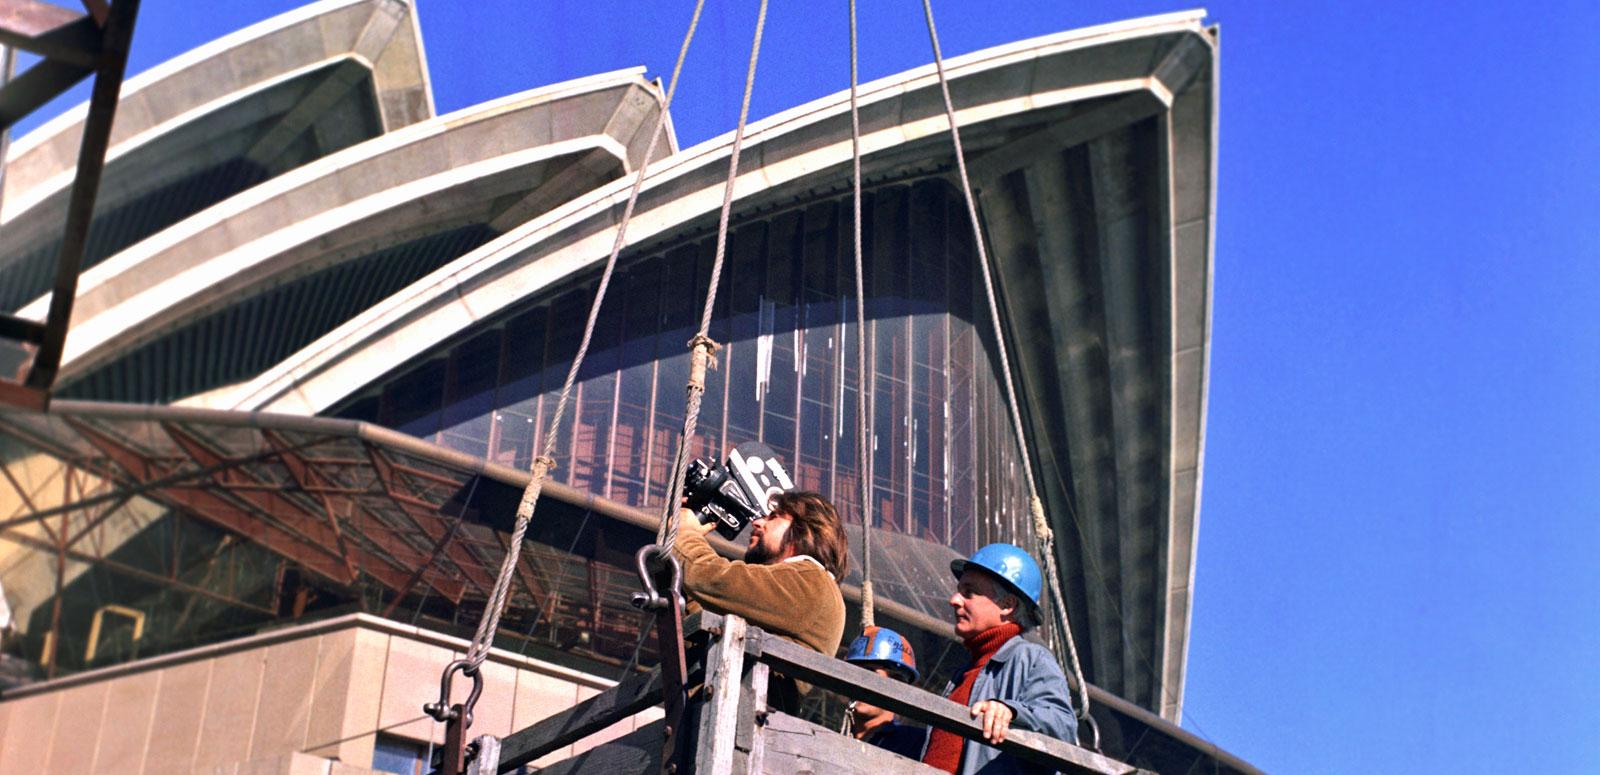 The sails of the Opera House tower above a camera operator and a man in a hardhat. They are standing in a wooden box which is hoisted to a crane.